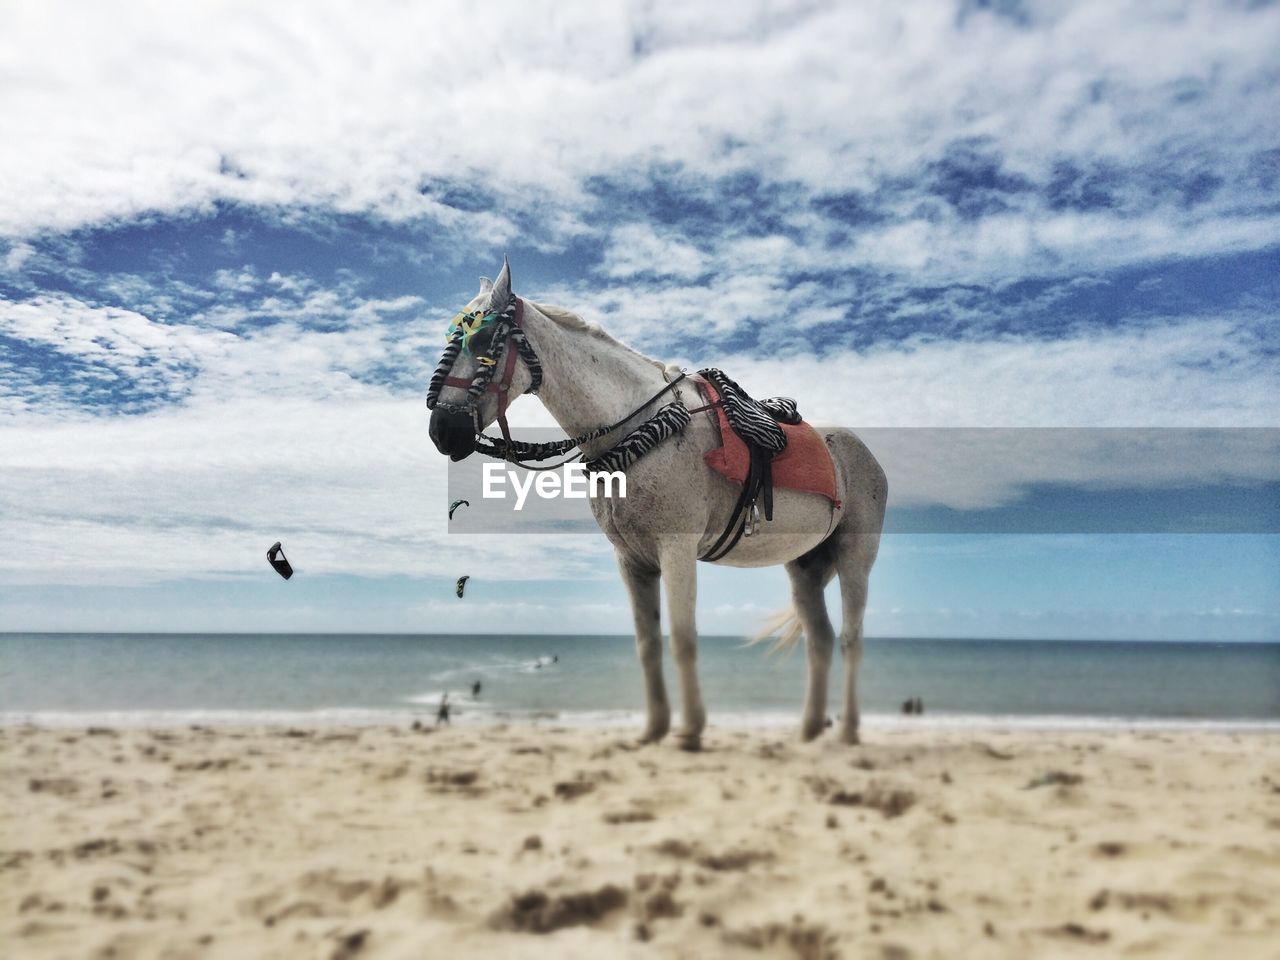 Horse standing on calm beach against clouds